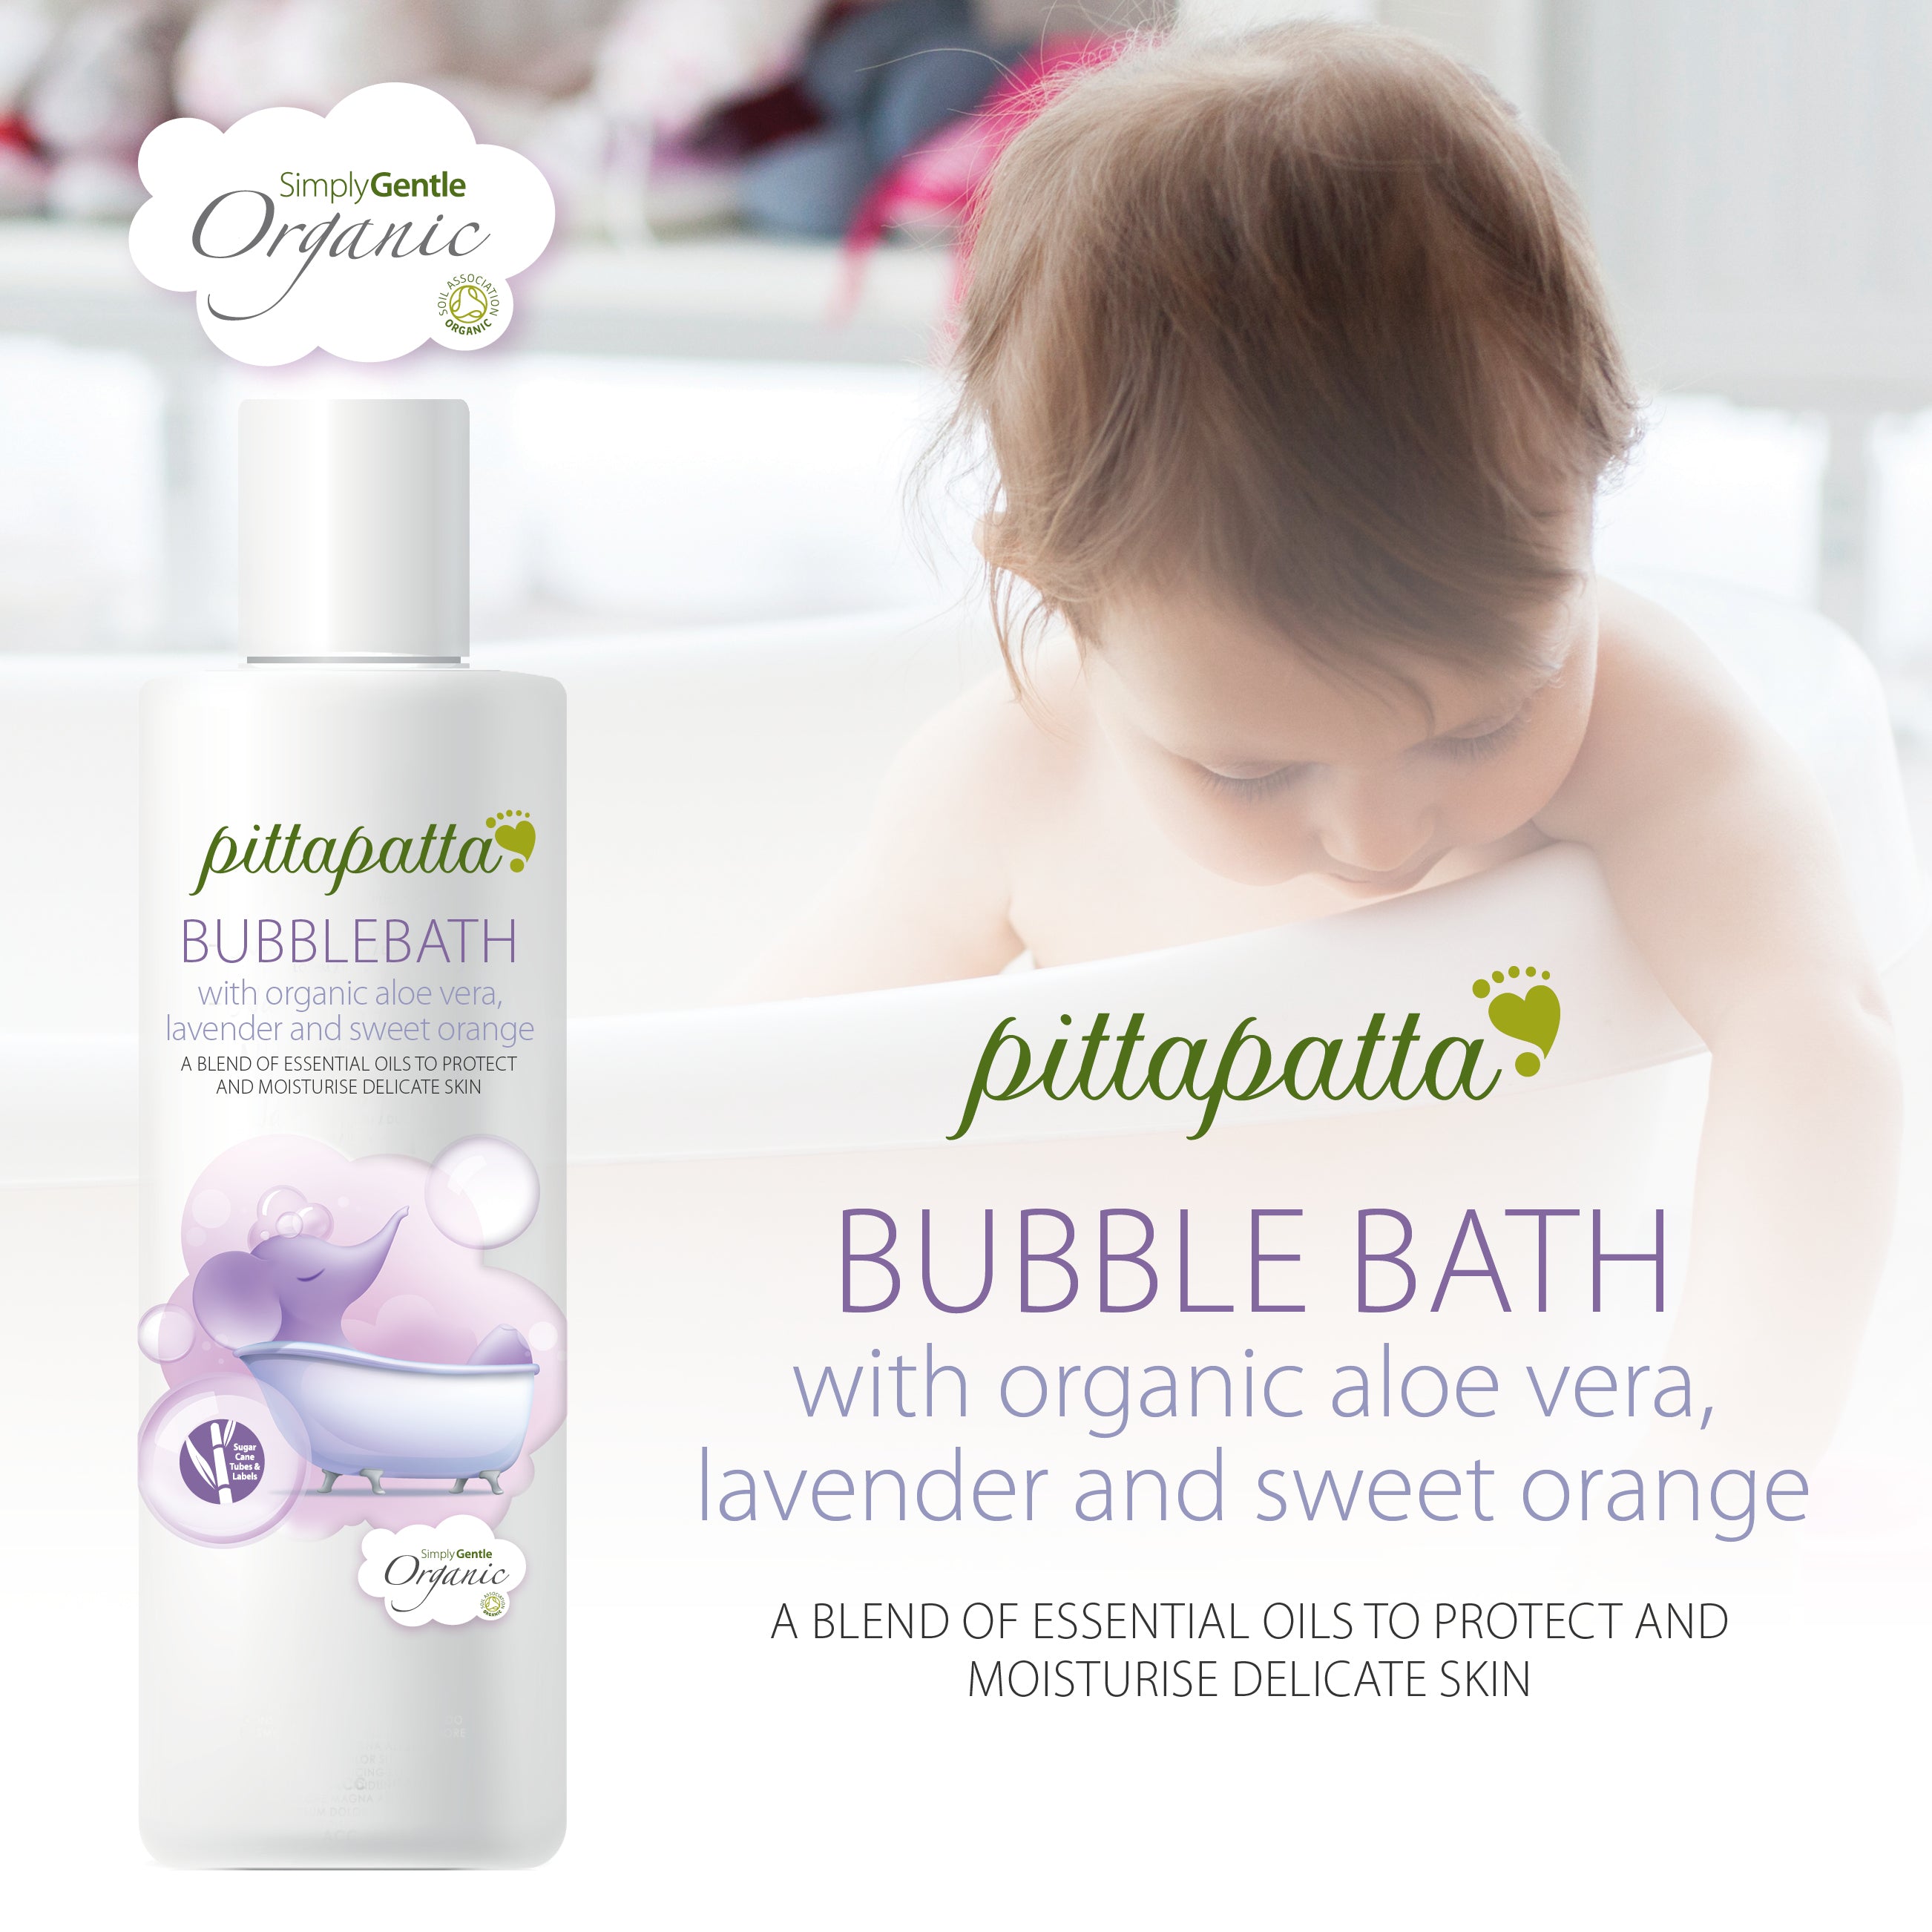 Pittapatta Organic Bubble Bath With organic aloe vera, lavender and sweet orange.  Our Bubble Bath is specially formulated with a blend of essential oils to protect and moisturise during daily baths, together with organic lavender oil to soothe little ones during bath time. Packed in recyclable bio-plastic.